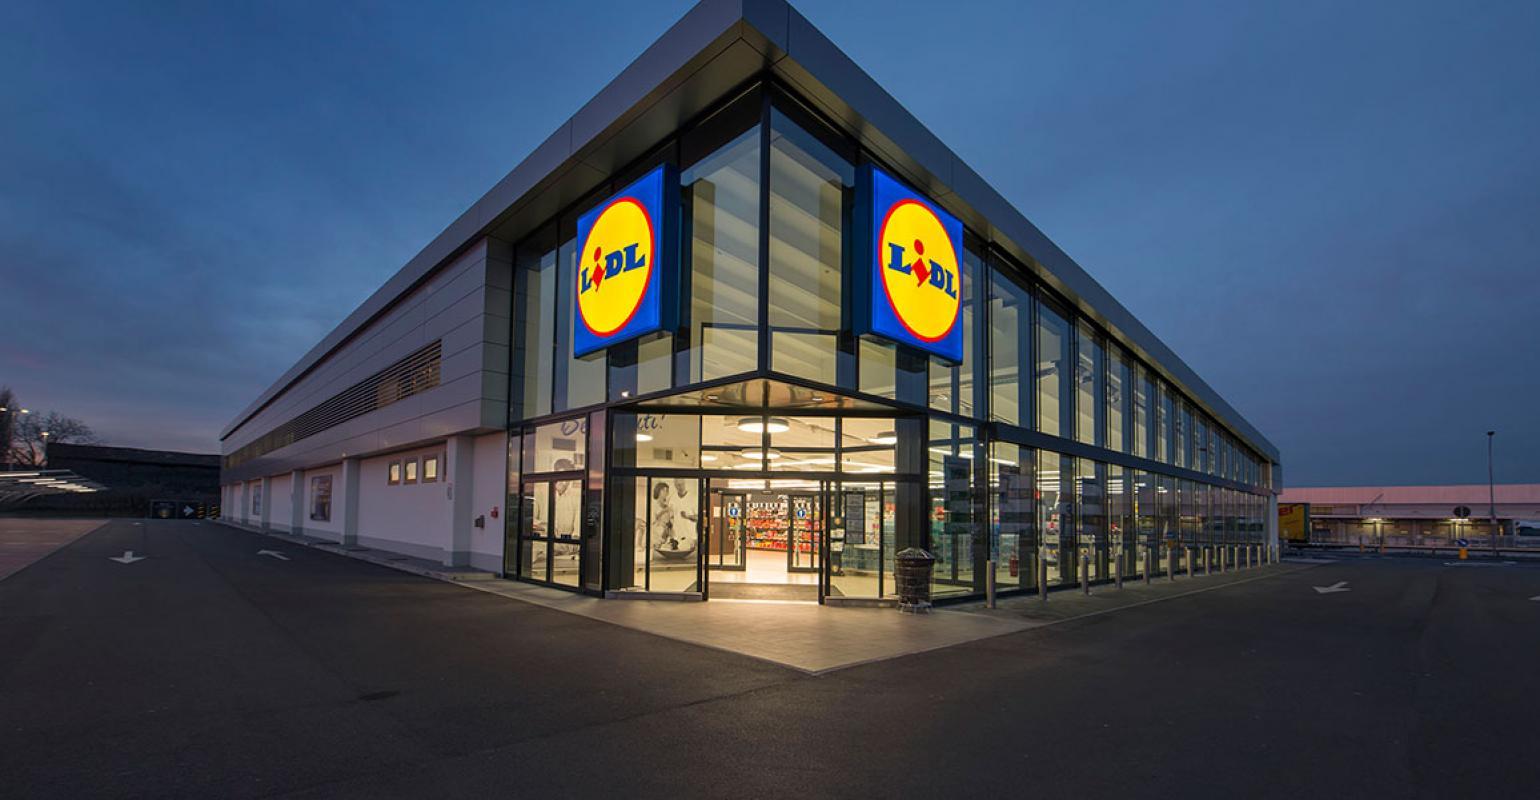 Lidl First 20 Us Stores To Open This Summer Supermarket News